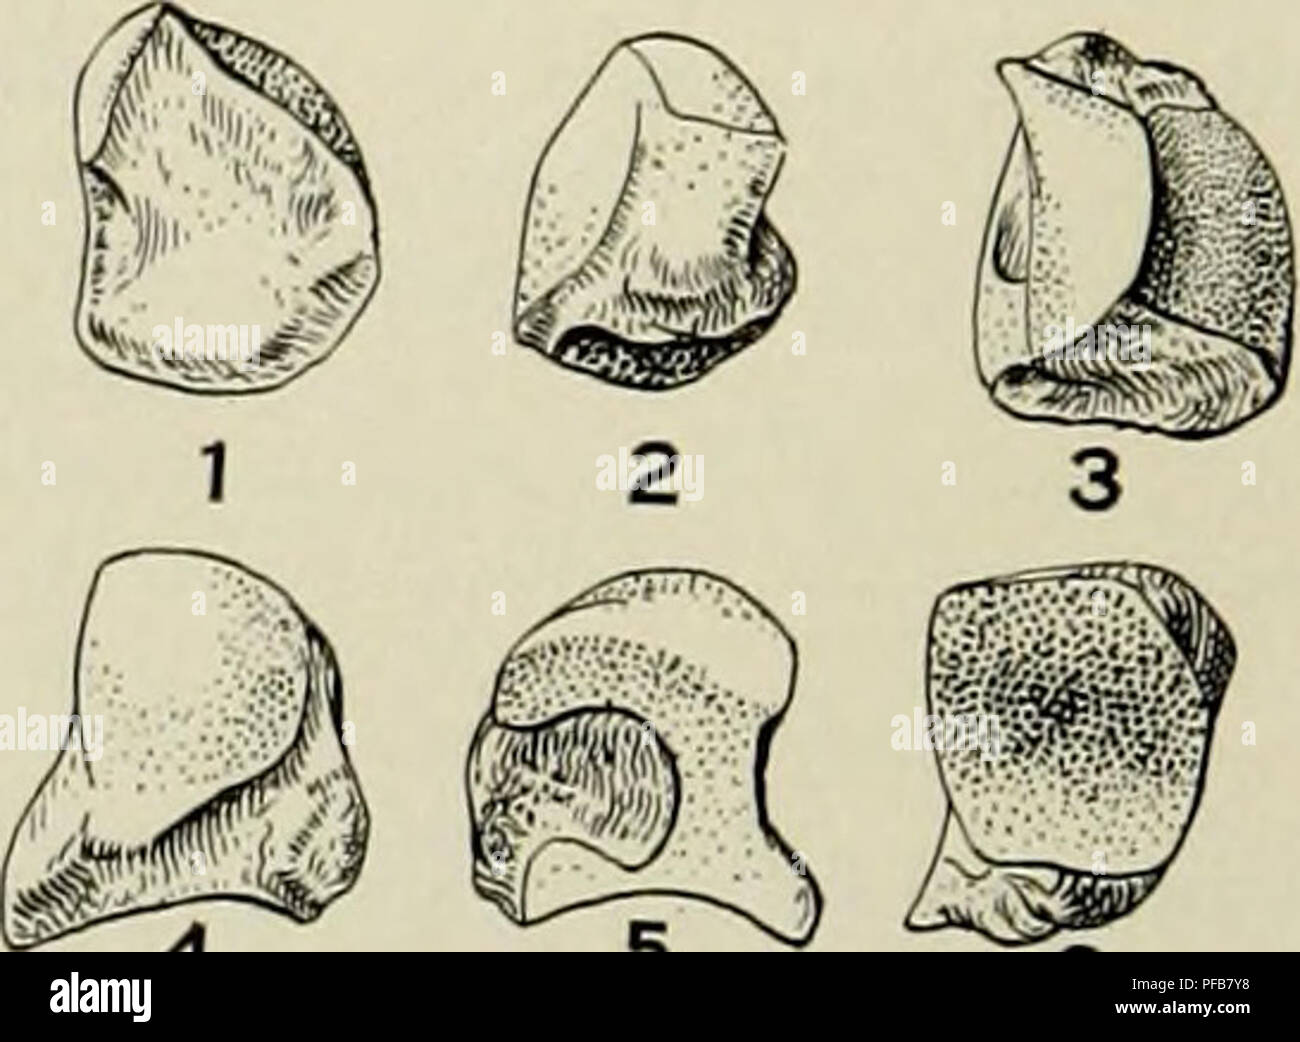 . Description of new carnivores from the Miocene of western Nebraska. Carnivora, Fossil; Paleontology; Paleontology. 238 MEMOIRS OF THE CARNEGIE MUSEUM Mc. Ill and the smaller for Mc. IV. In Daphasnus the latter facets are divided in about the same proportions as in the present genus. Measurements of Magnum. Mm. Greatest antero-posterior diameter 20 Transverse diameter of dorsal face 11 Greatest vertical diameter 16 Unciform.—The facet for the cuneiform does not extend so far down on the ulnar angle as is the case in Daphcenus, otherwise I cannot see any difference in the unciform in the two g Stock Photo